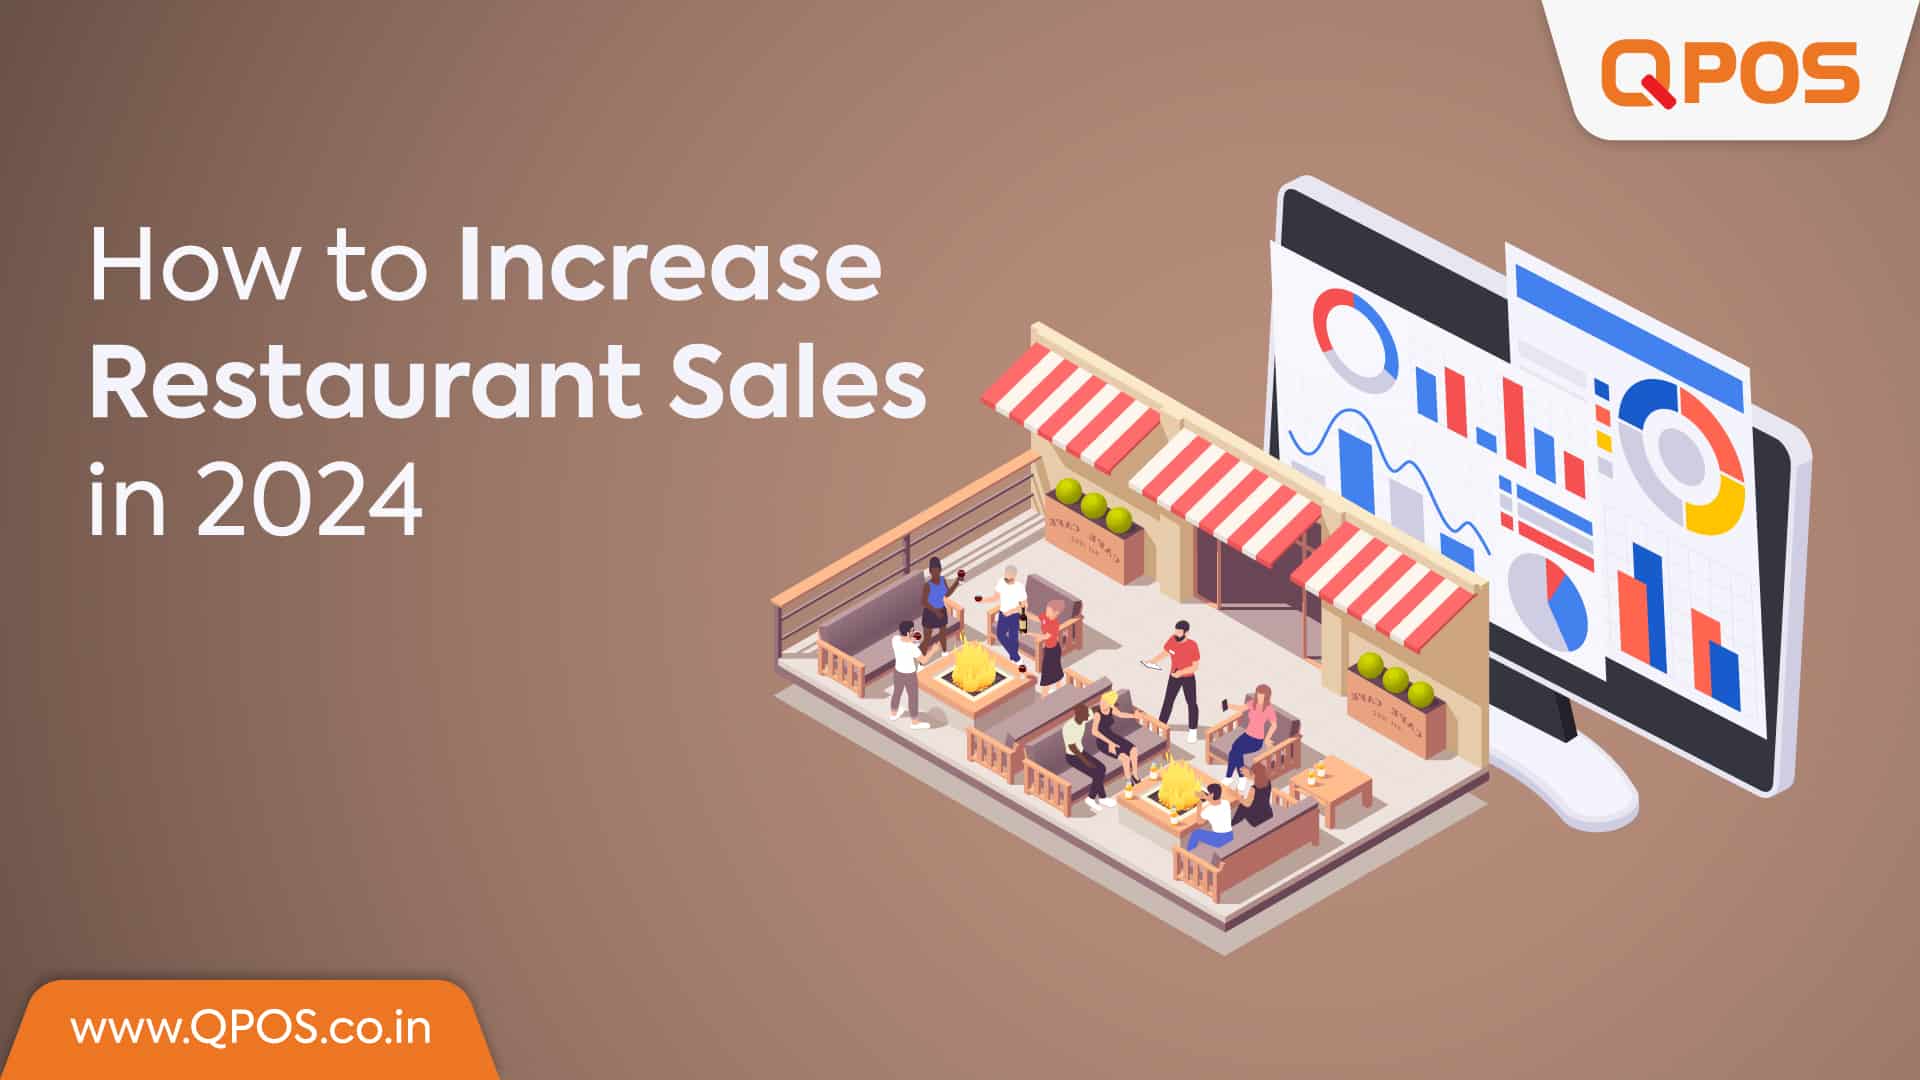 How to Increase Restaurant Sales in 2024